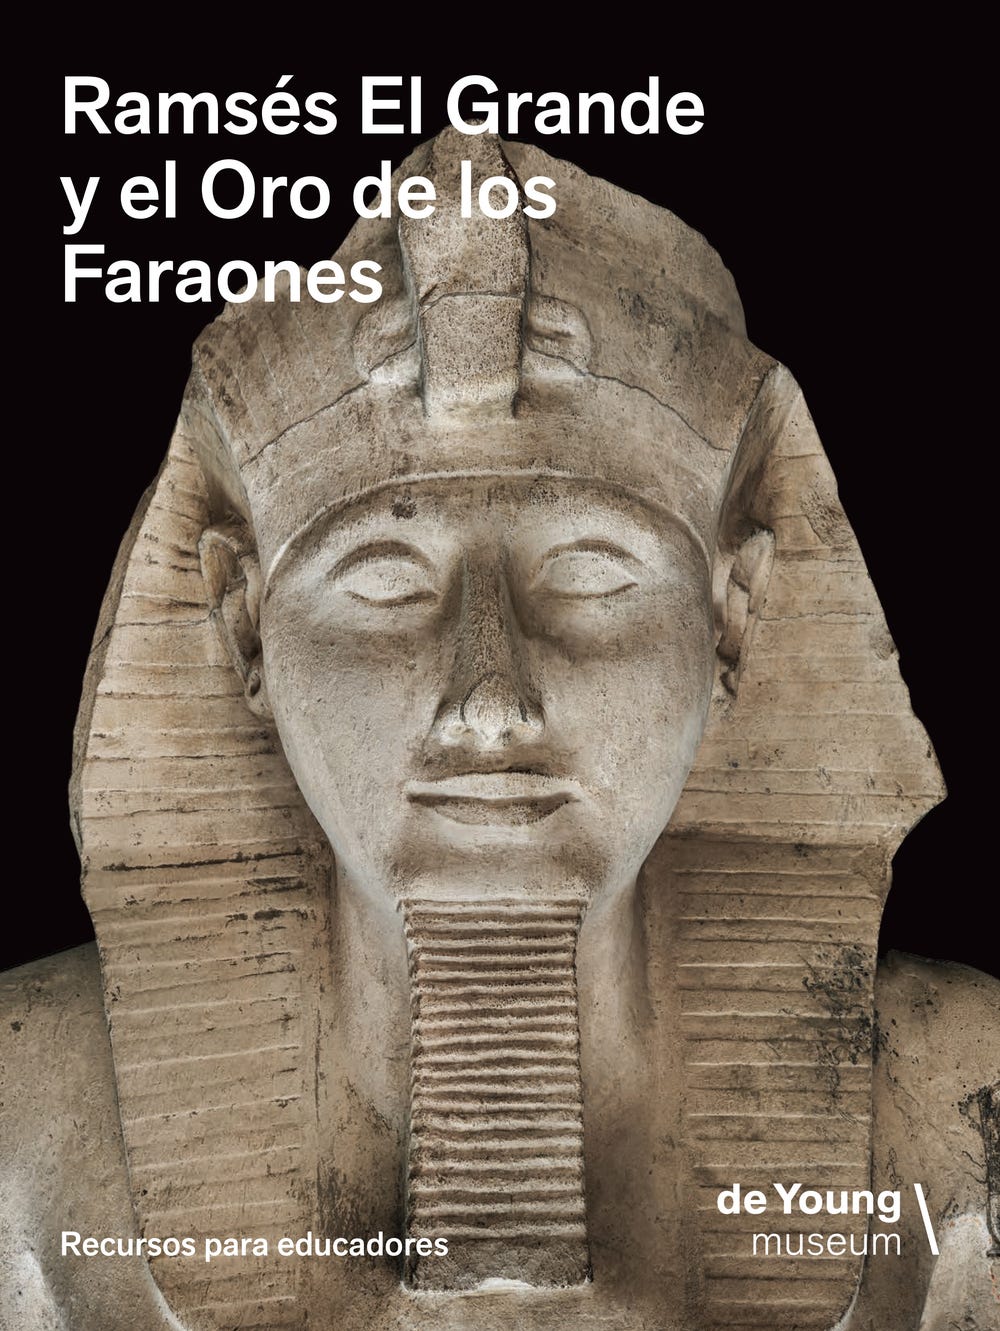 Cover of Ramses exhibition educator resources in Spanish